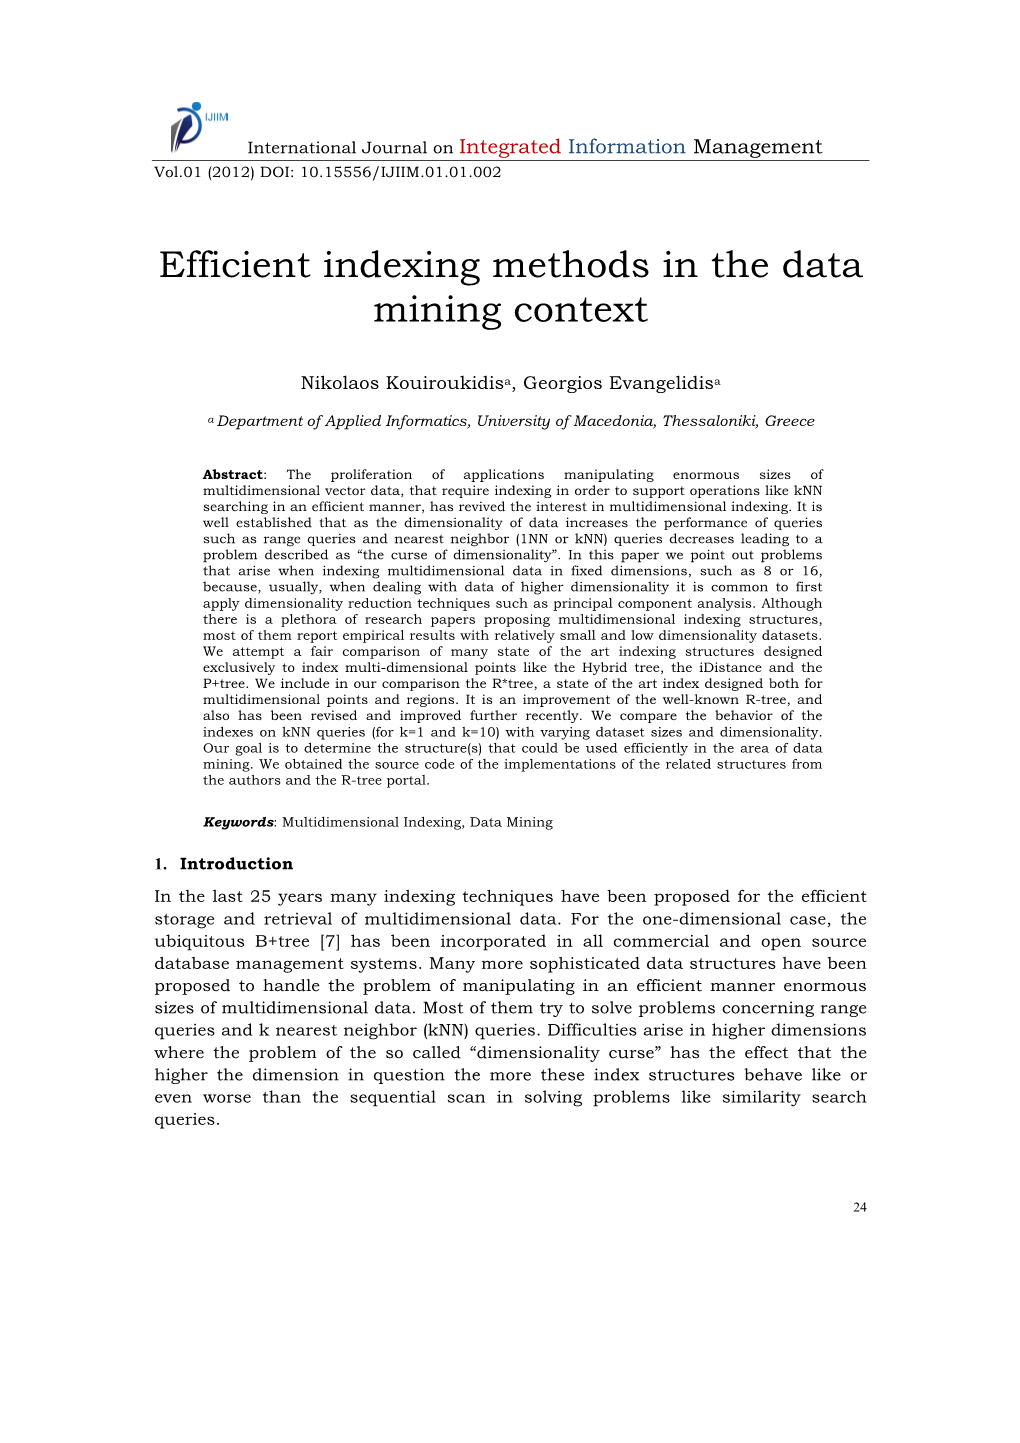 Efficient Indexing Methods in the Data Mining Context